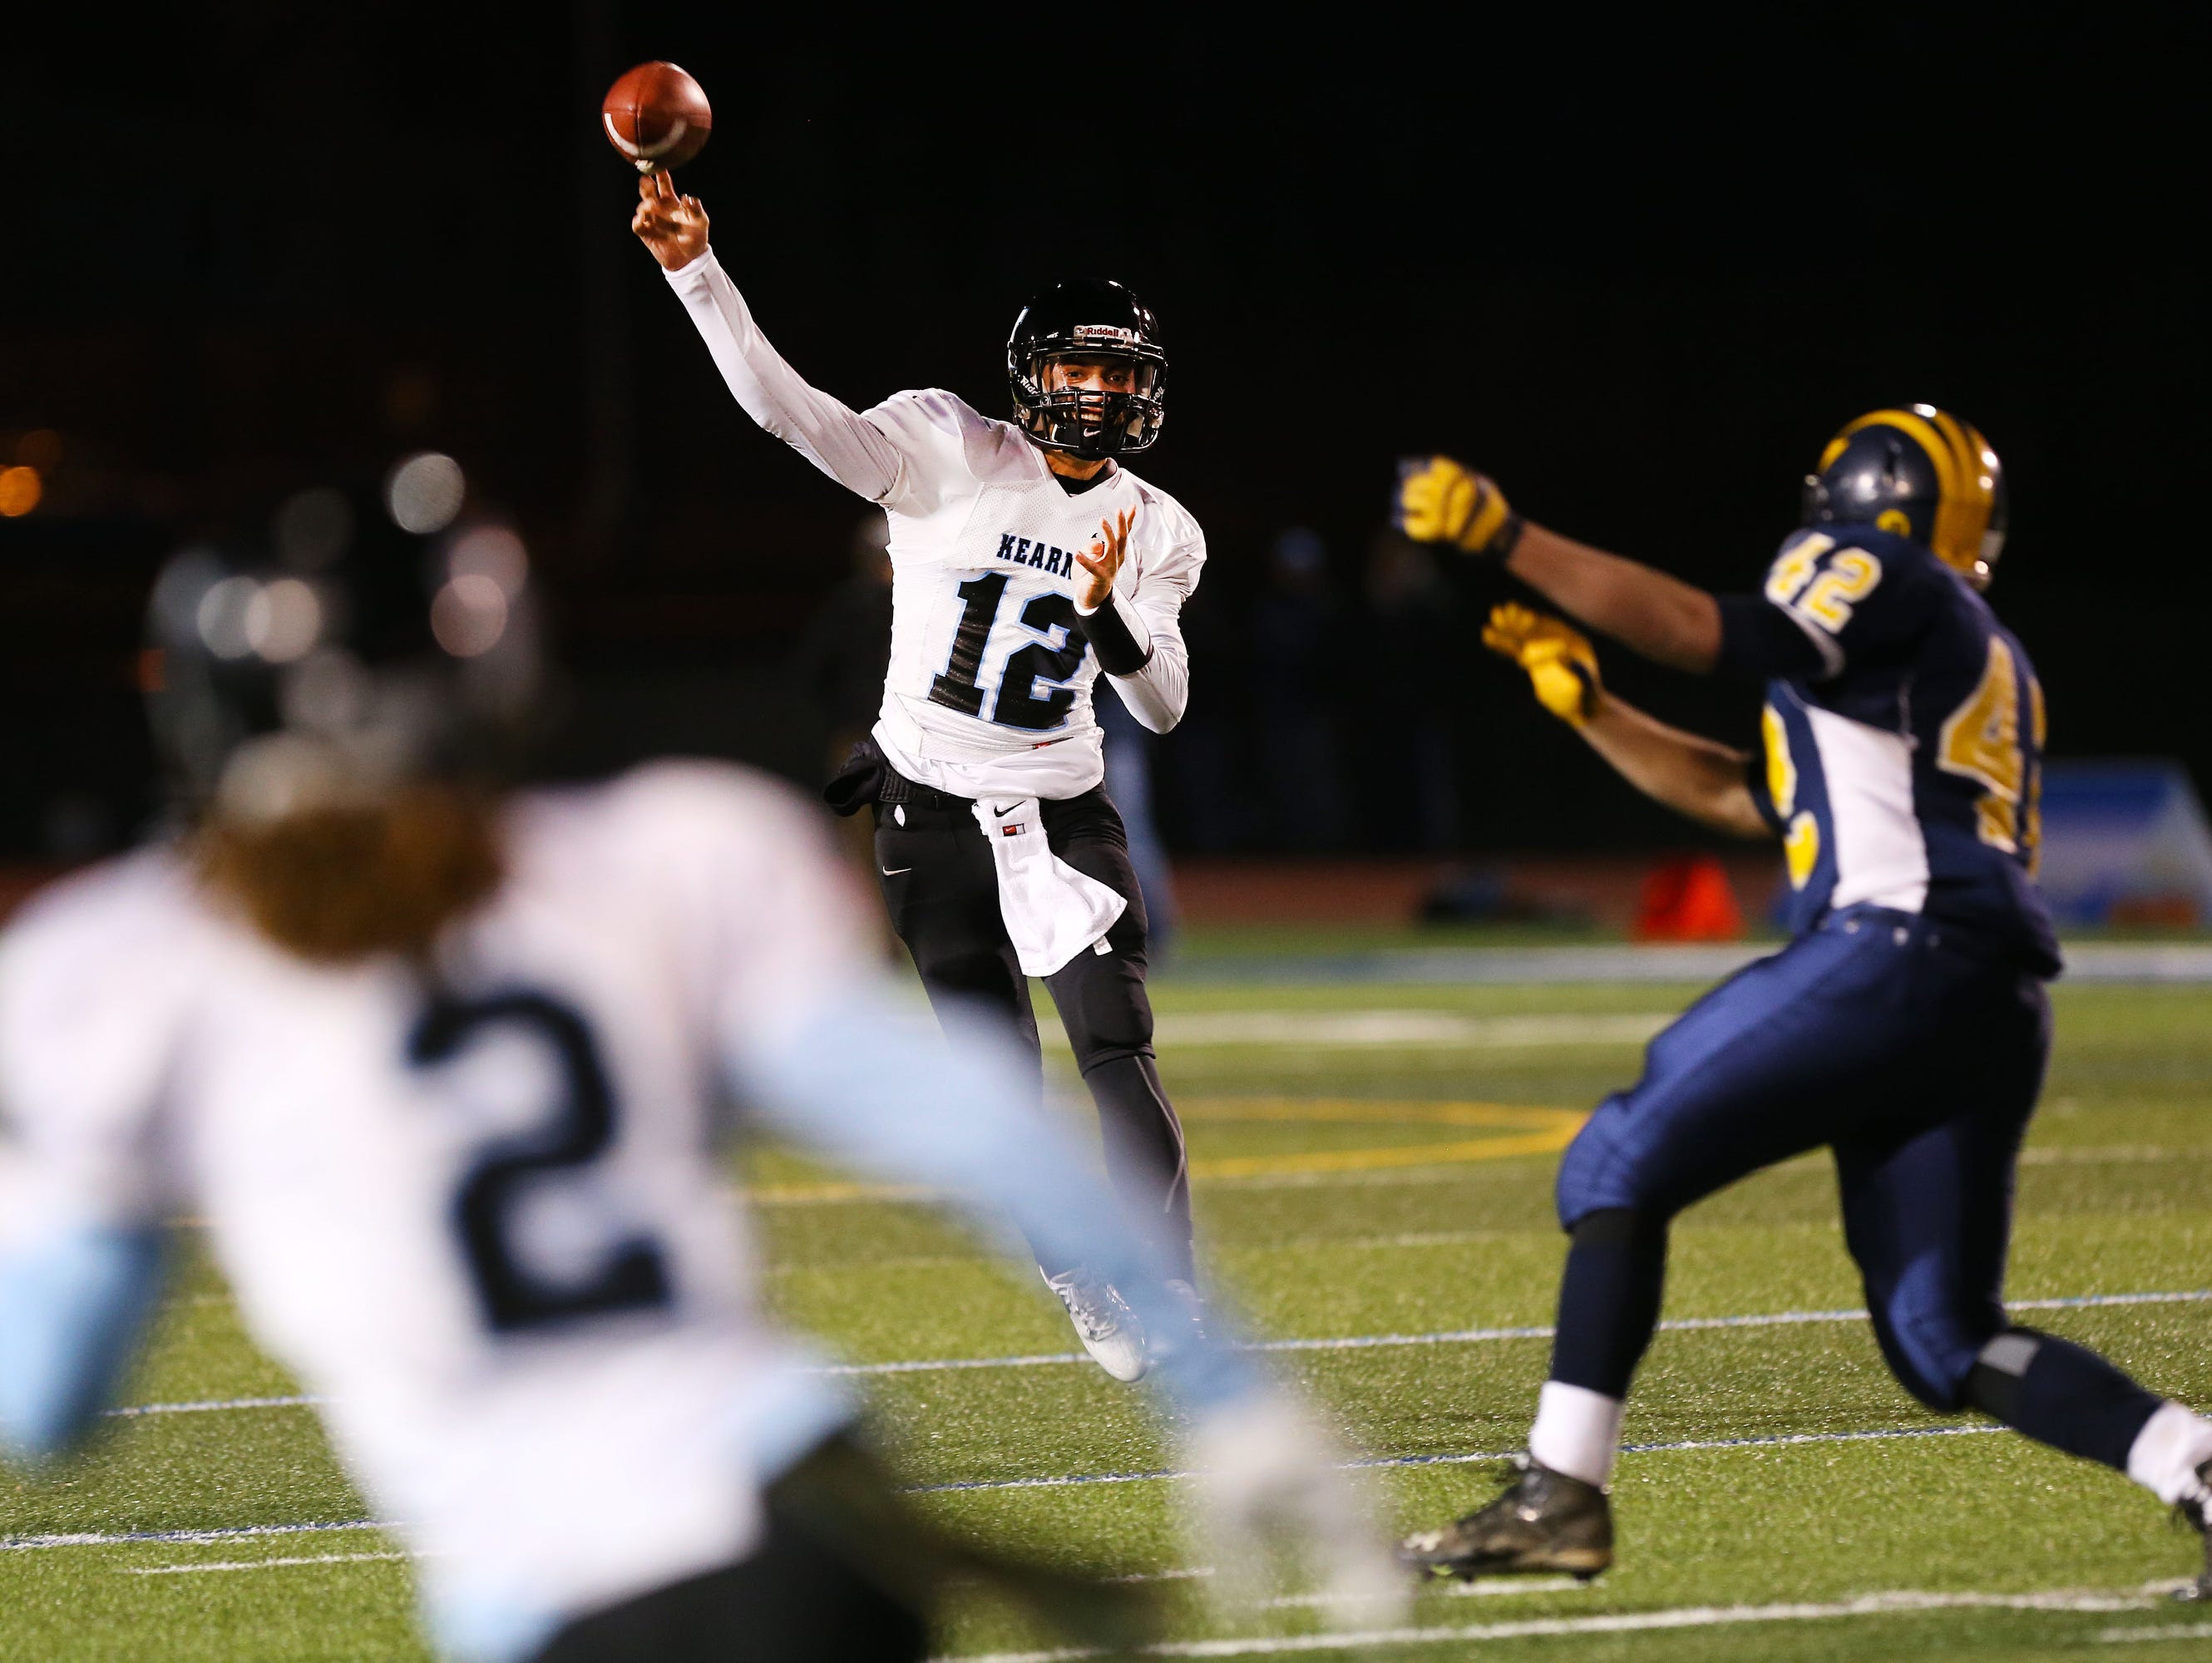 Bishop Kearney's Todd LaRocca passes to Justin Davis during the Class D state semifinal game at Cicero-North Syracuse High School on Friday, November 20, 2015.